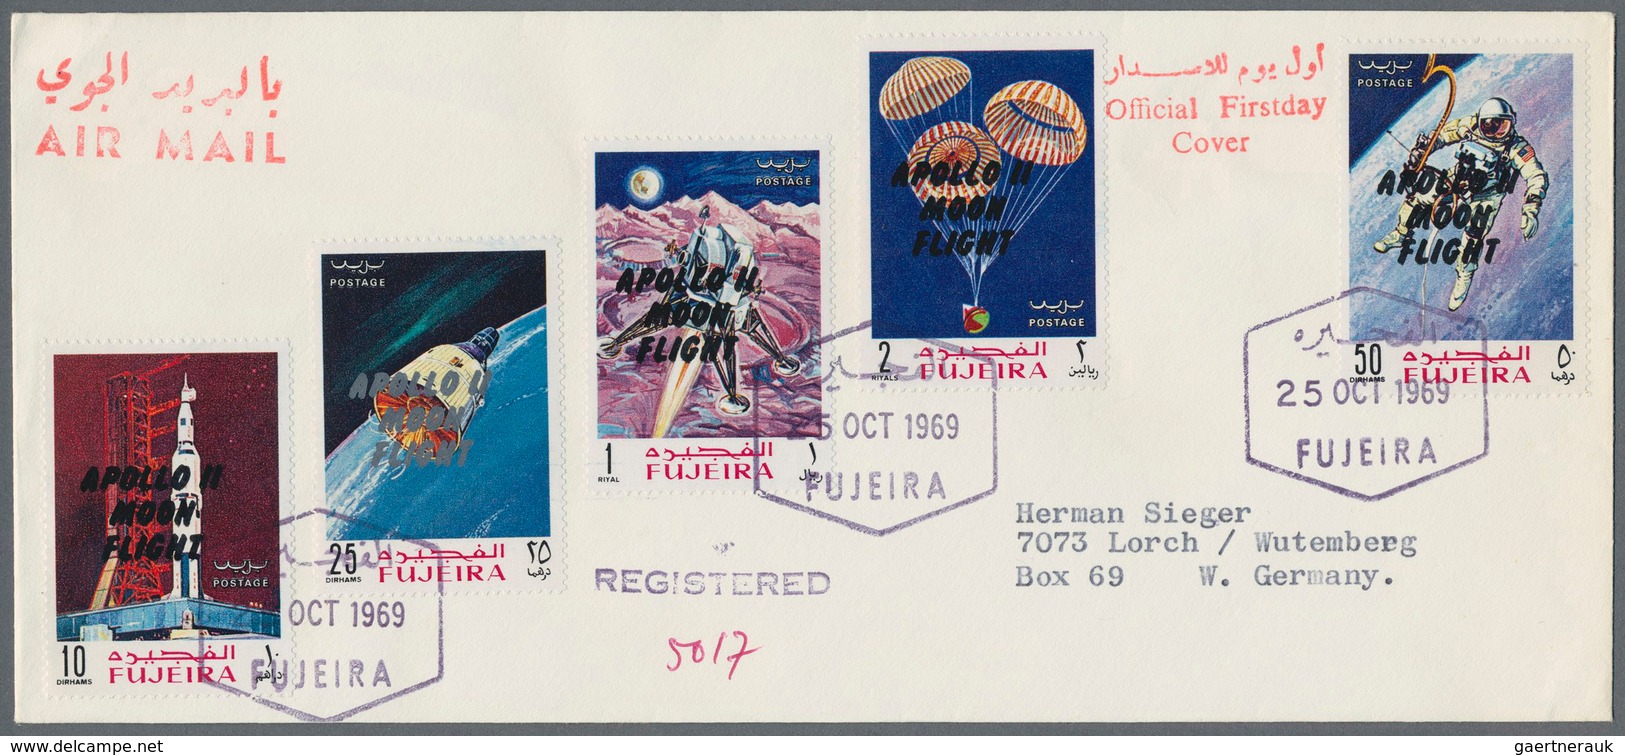 Fudschaira / Fujeira: 1969, APOLLO, Group Of 18 Covers: Michel Nos. 399/407 A And A 399/407 A On Fou - Fudschaira